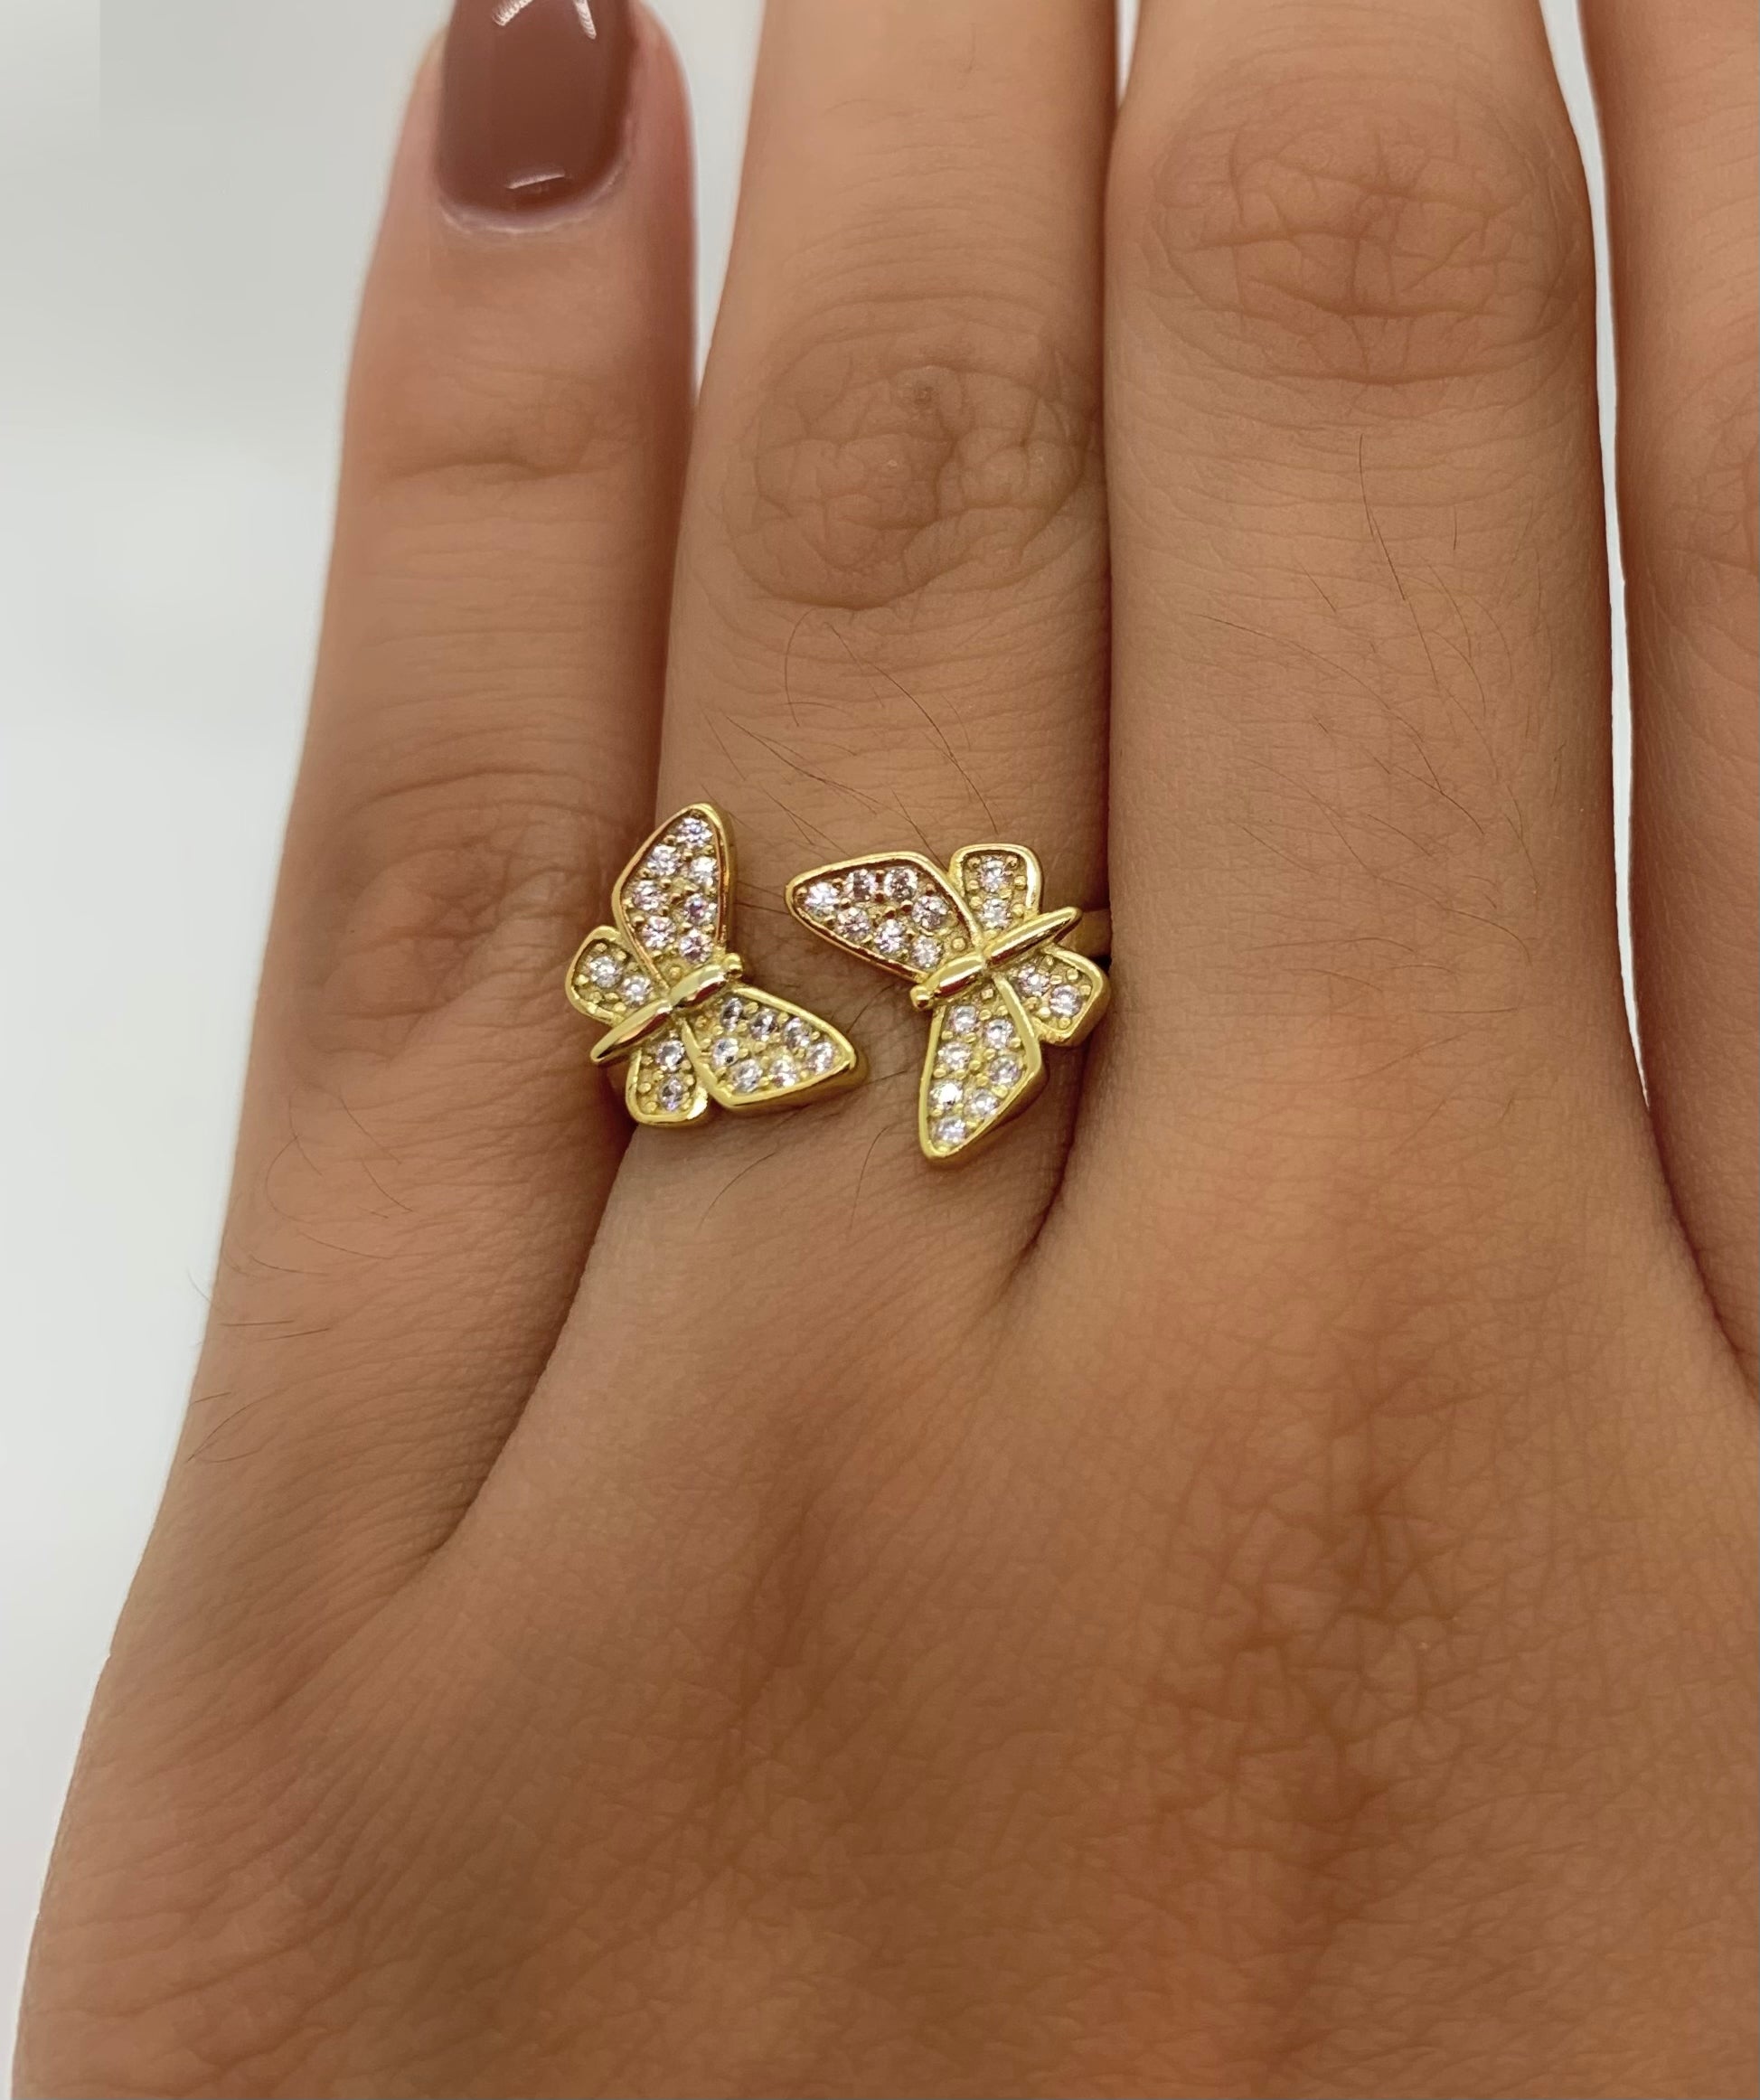 Golden ring in butterfly design | THOMAS SABO